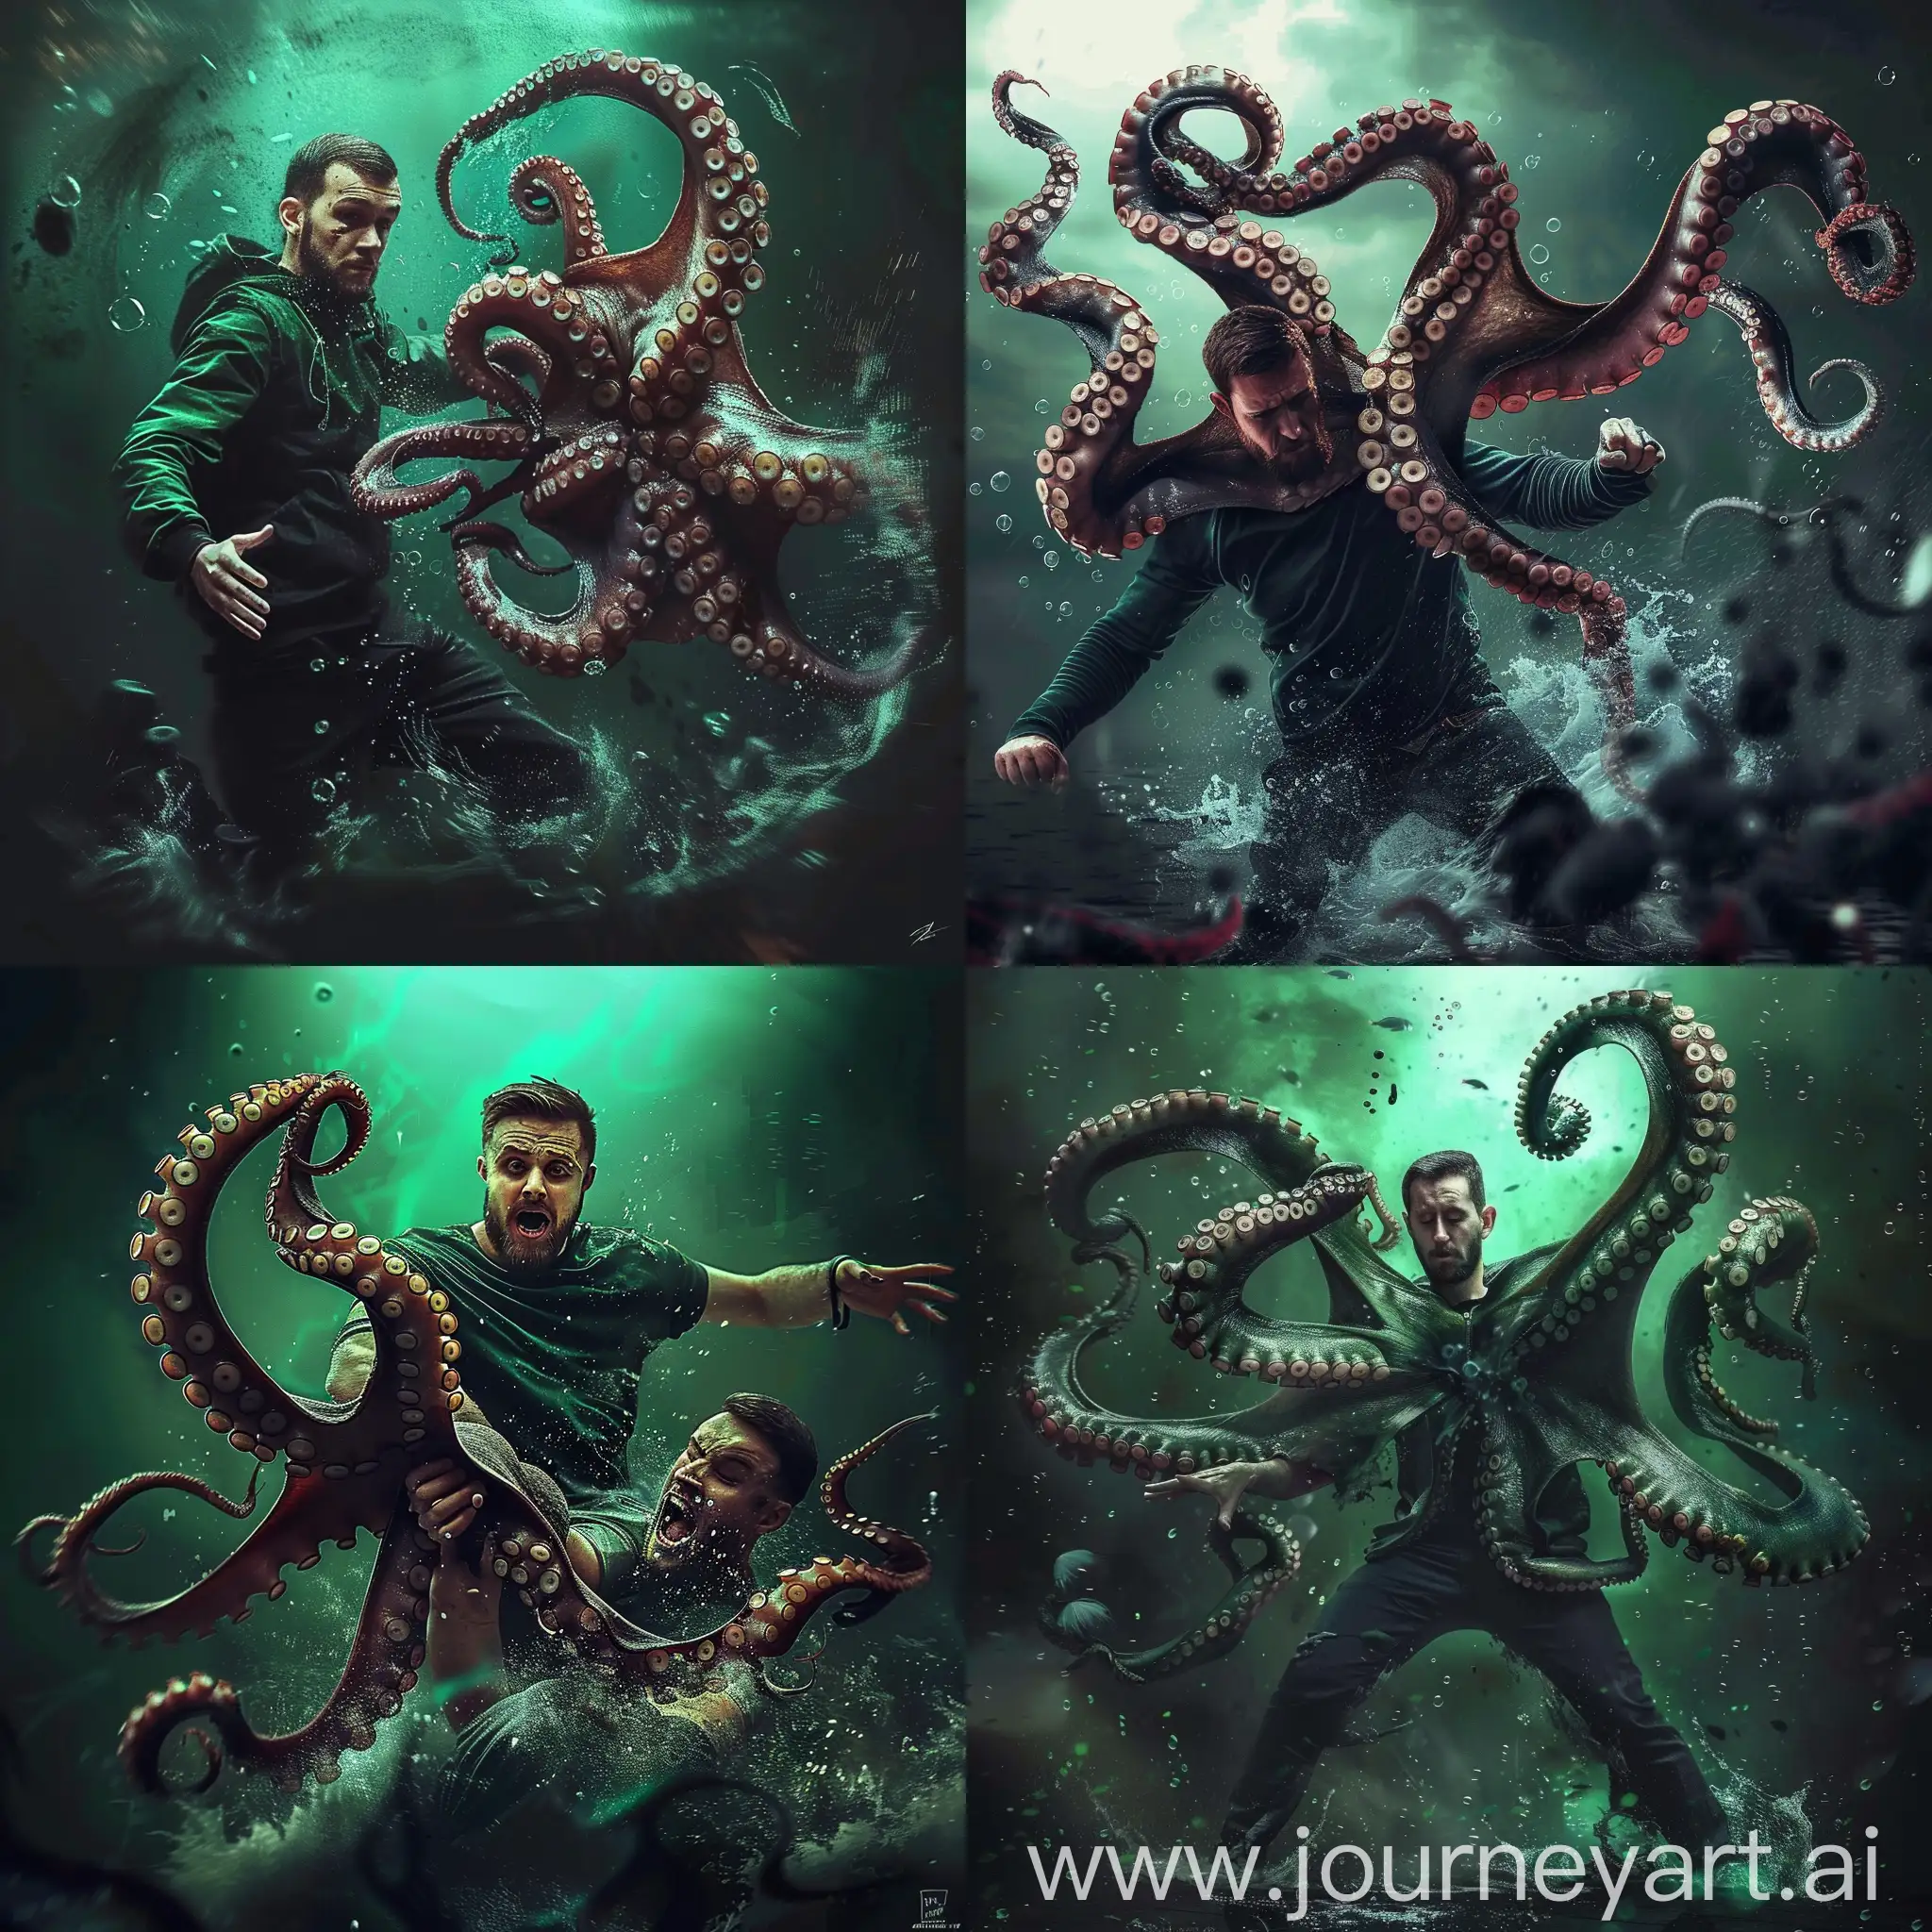  poster design of an octopus grabbing a man --sref https://i.pinimg.com/564x/5b/4b/ed/5b4bed433016fbc6ec417c46f015e344.jpg --style raw --v 6